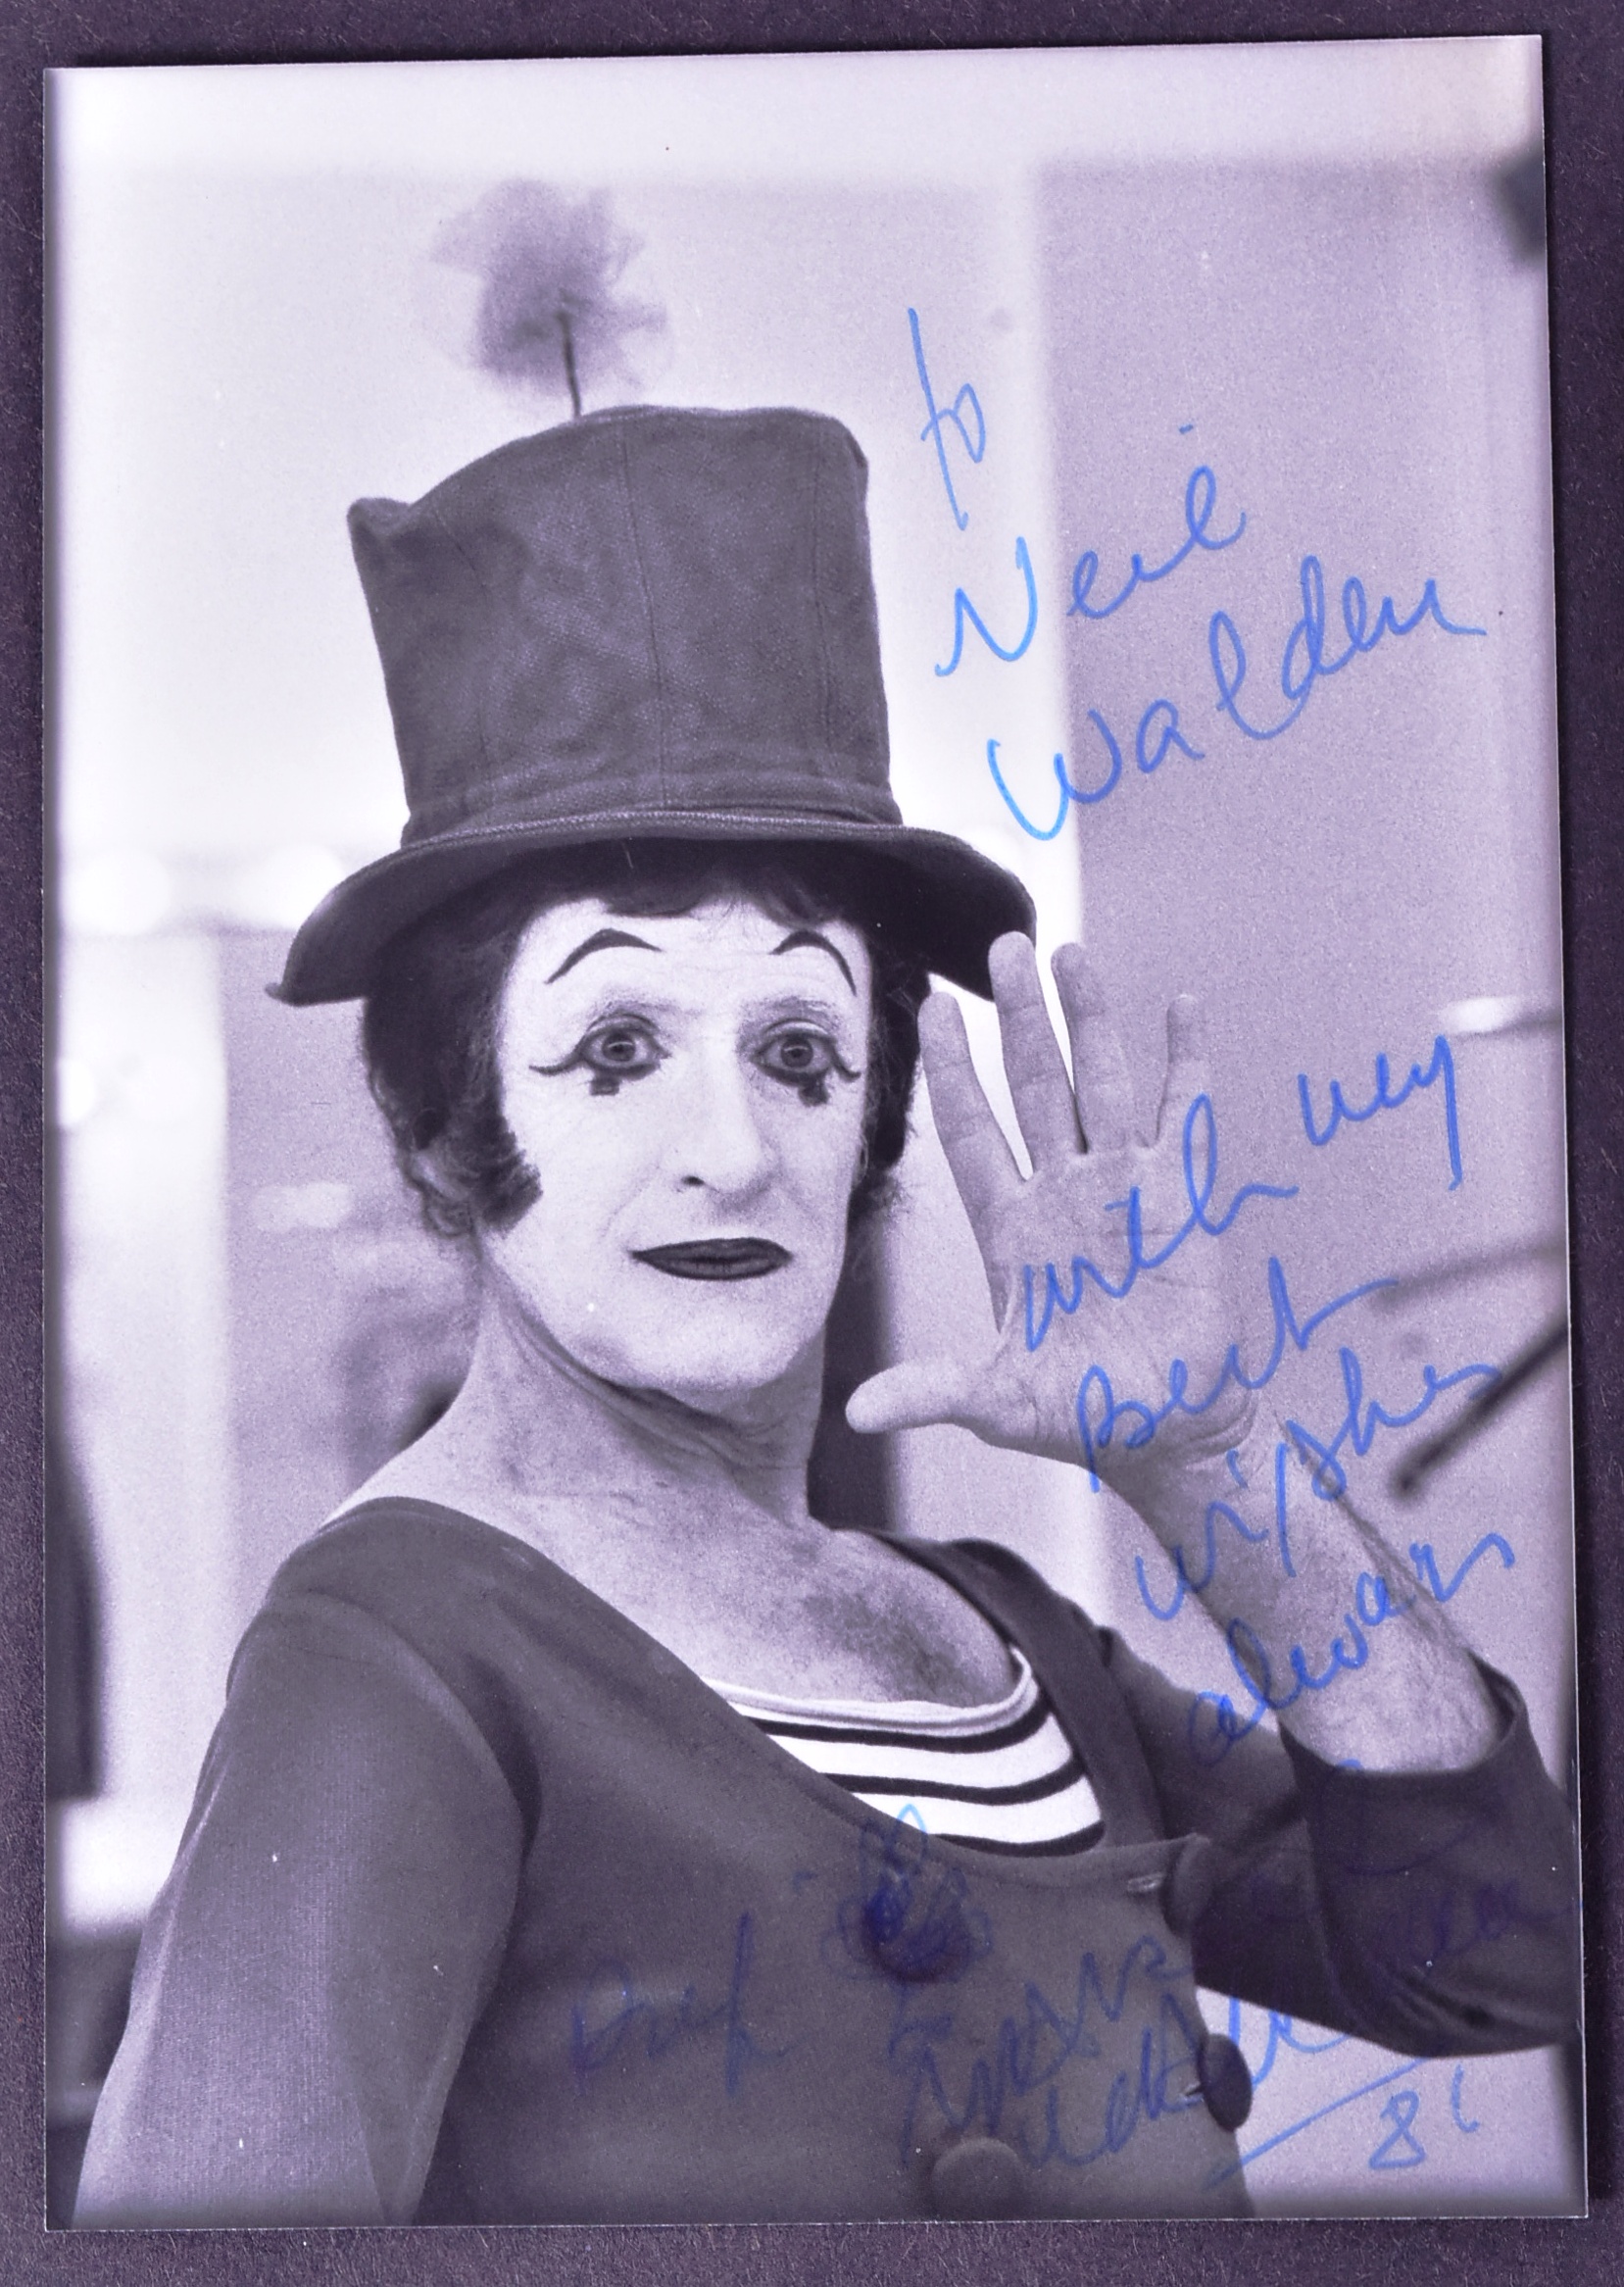 MARCEL MARCEAU - 1923-2007 - SIGNED PHOTOGRAPH - Image 2 of 3